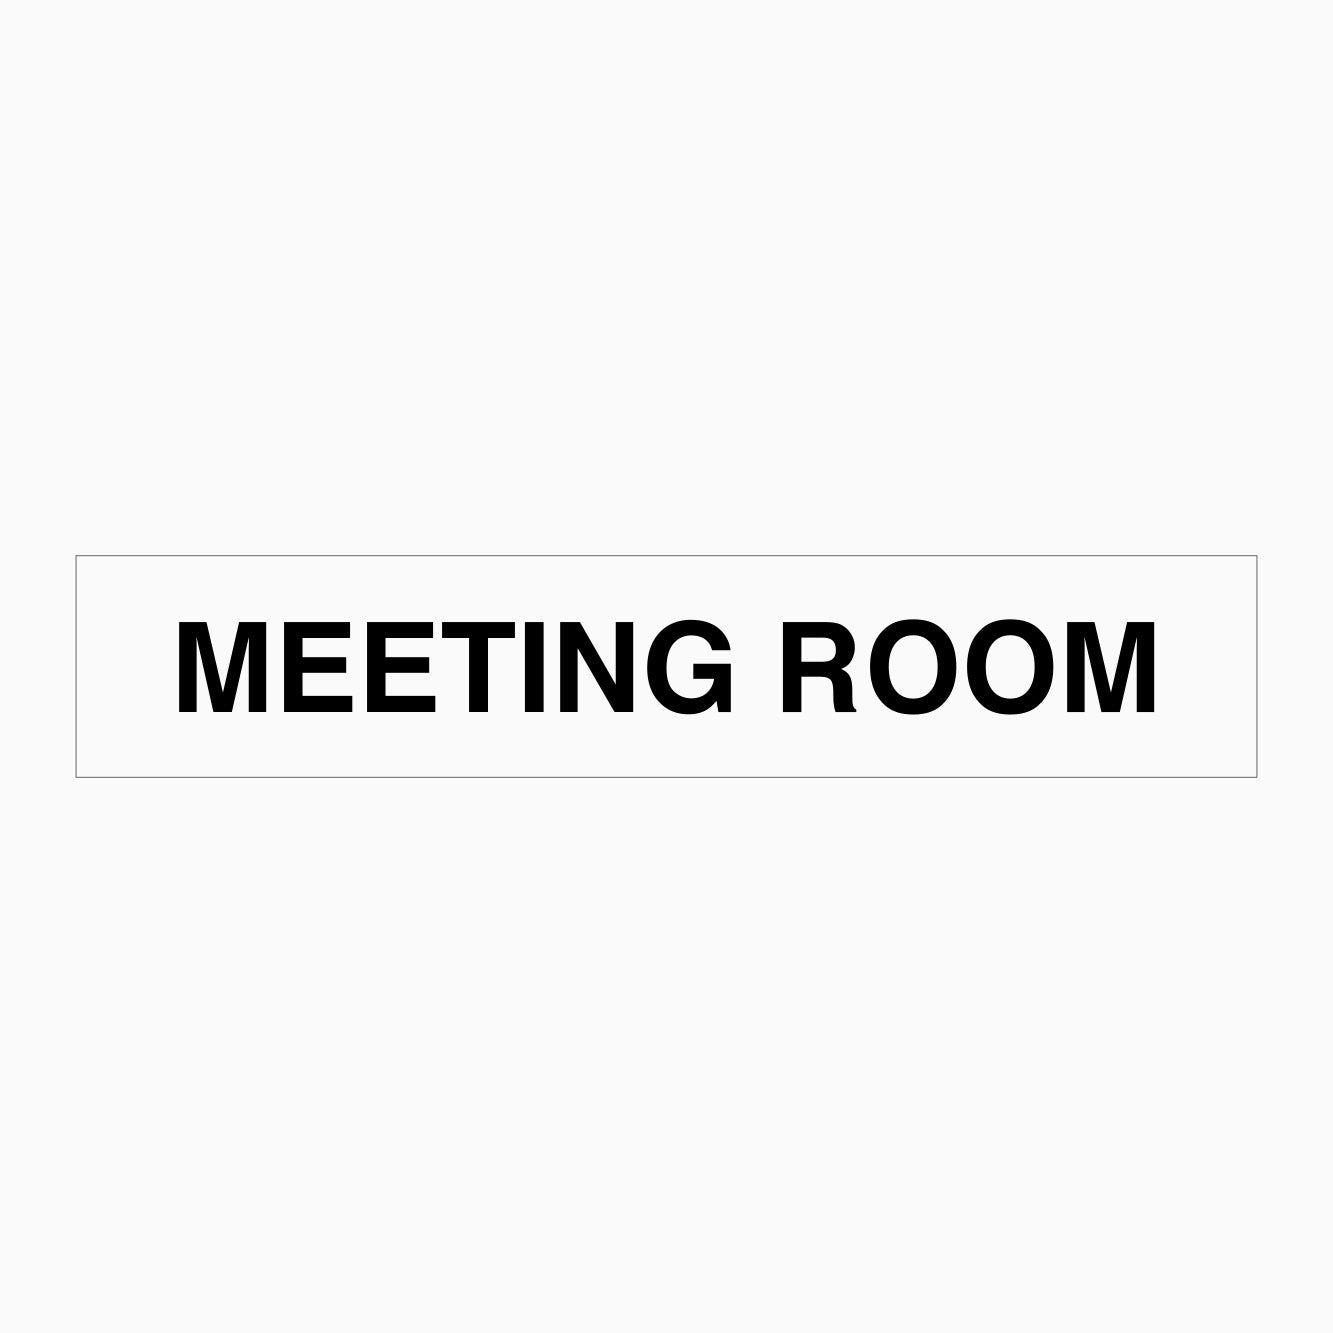 MEETING ROOM SIGN - GET SIGNS